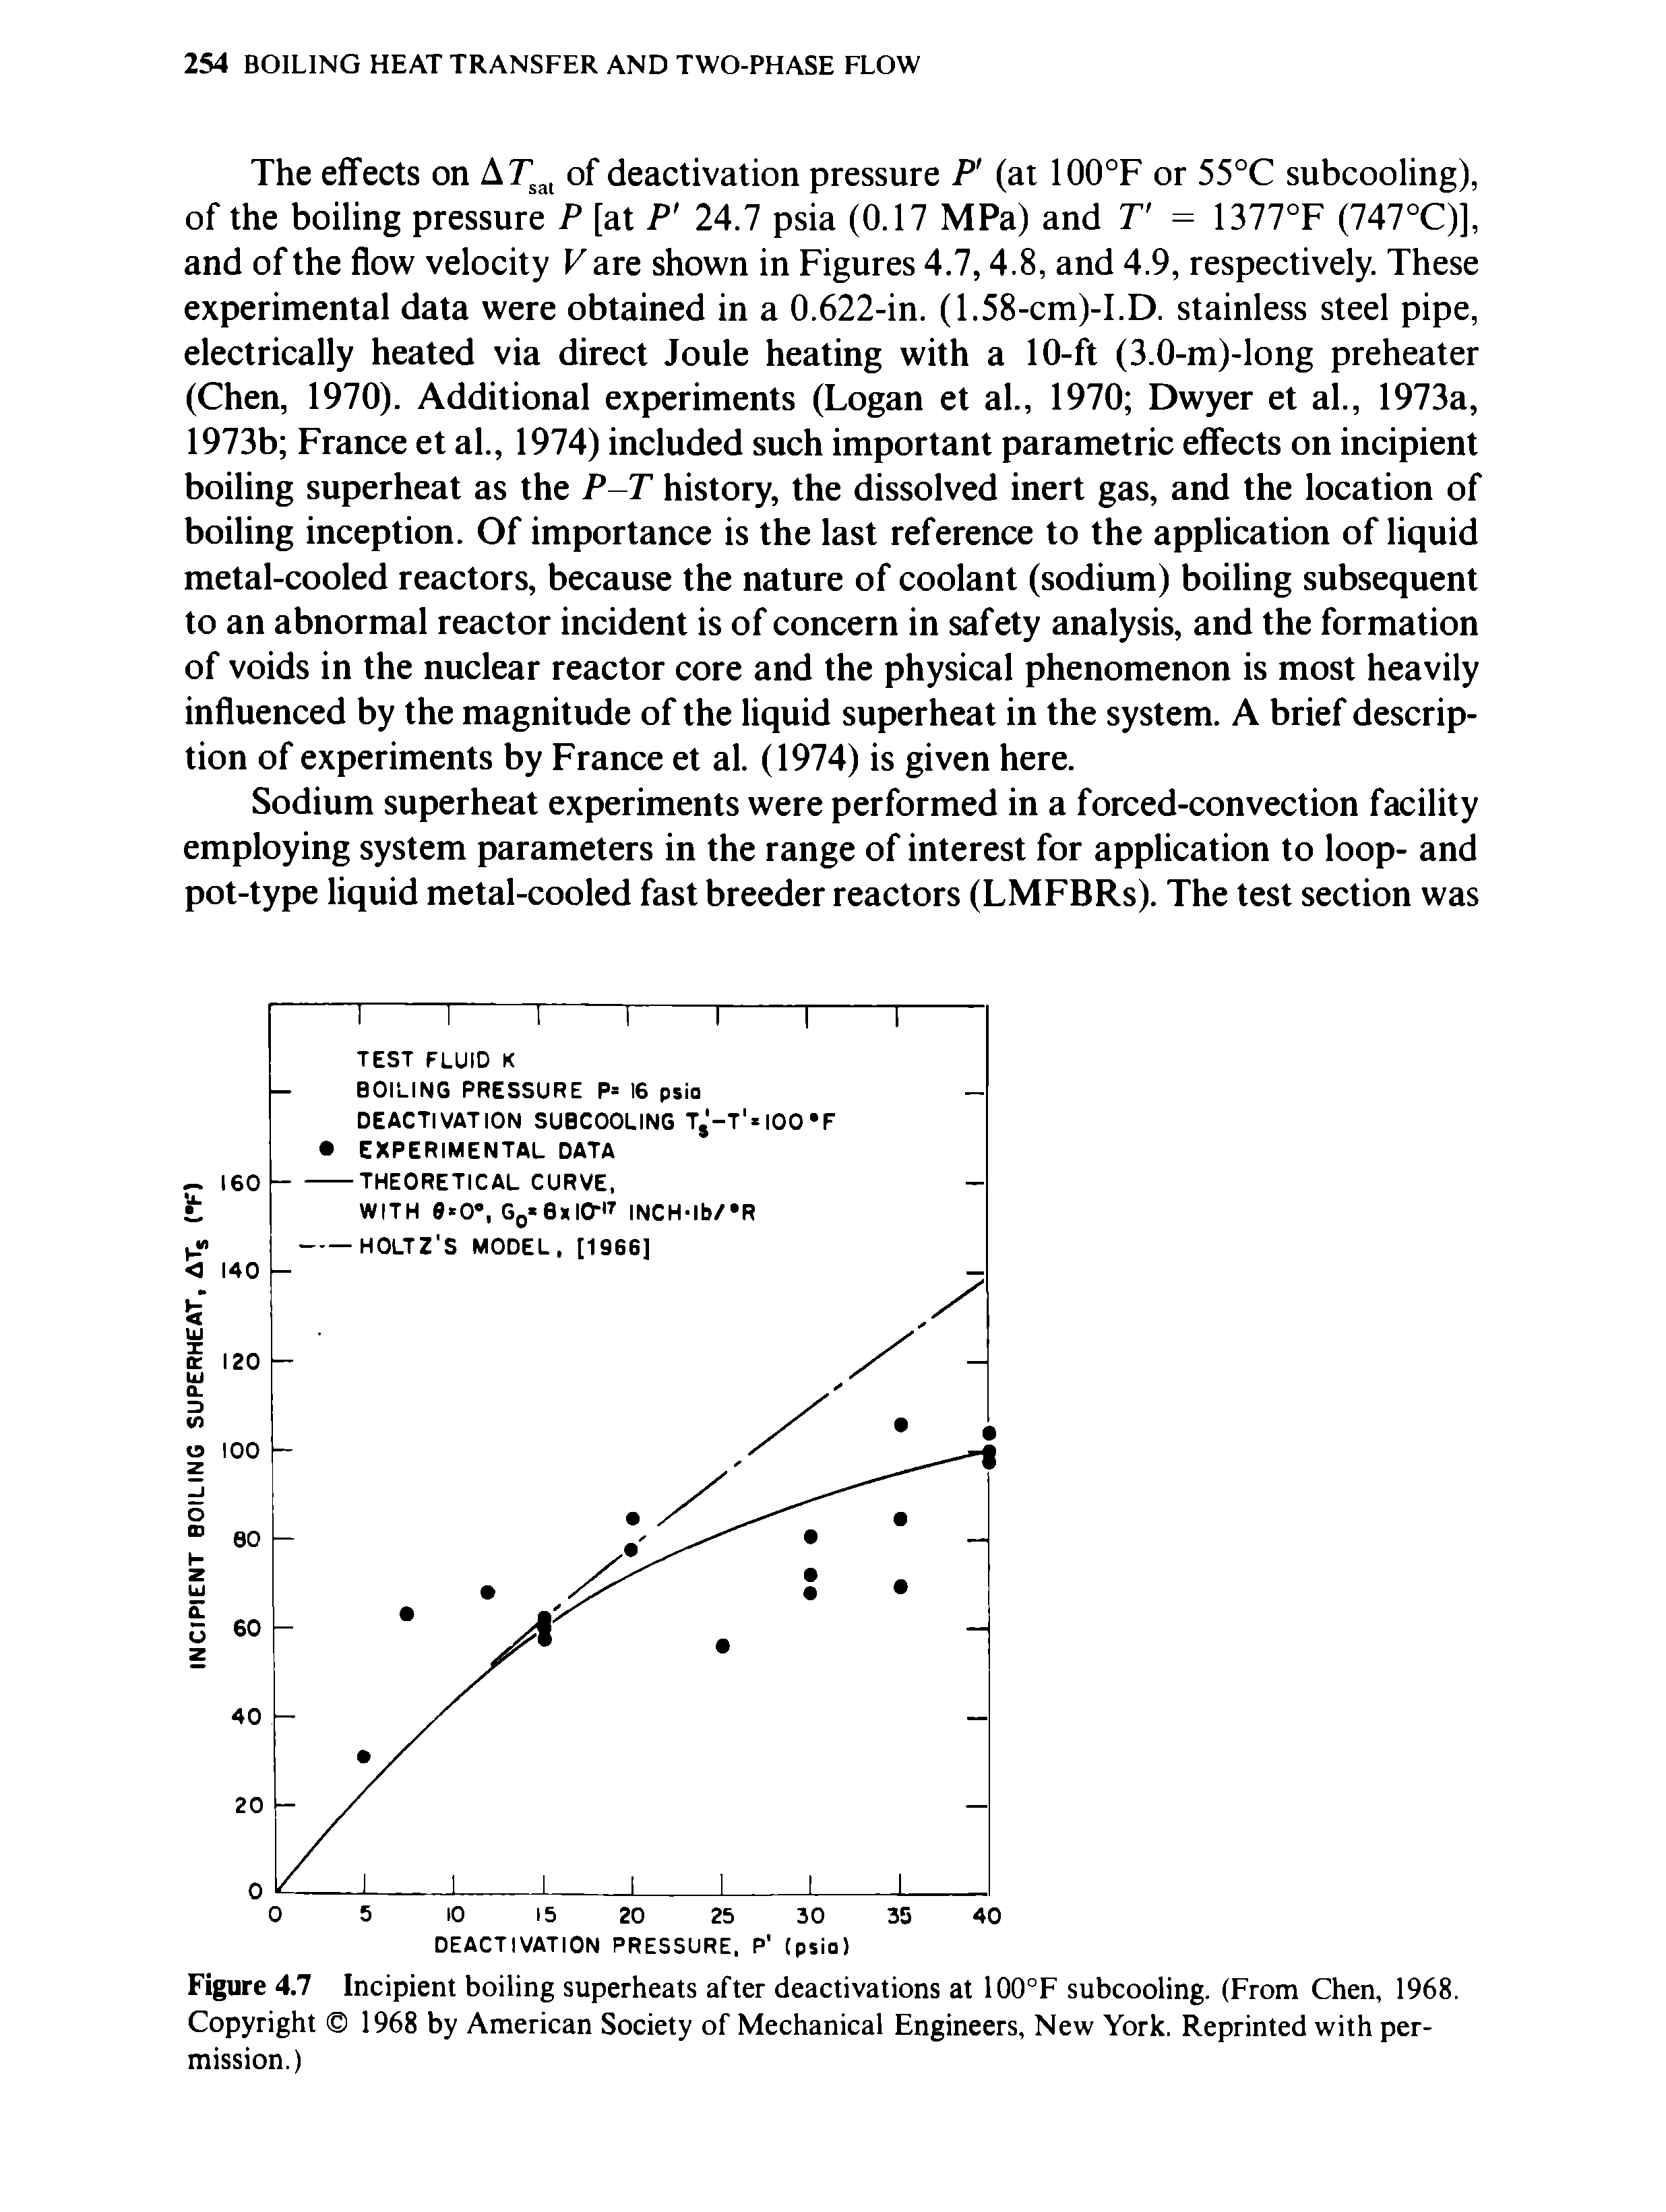 Figure 4.7 Incipient boiling superheats after deactivations at 100°F subcooling. (From Chen, 1968. Copyright 1968 by American Society of Mechanical Engineers, New York. Reprinted with permission.)...